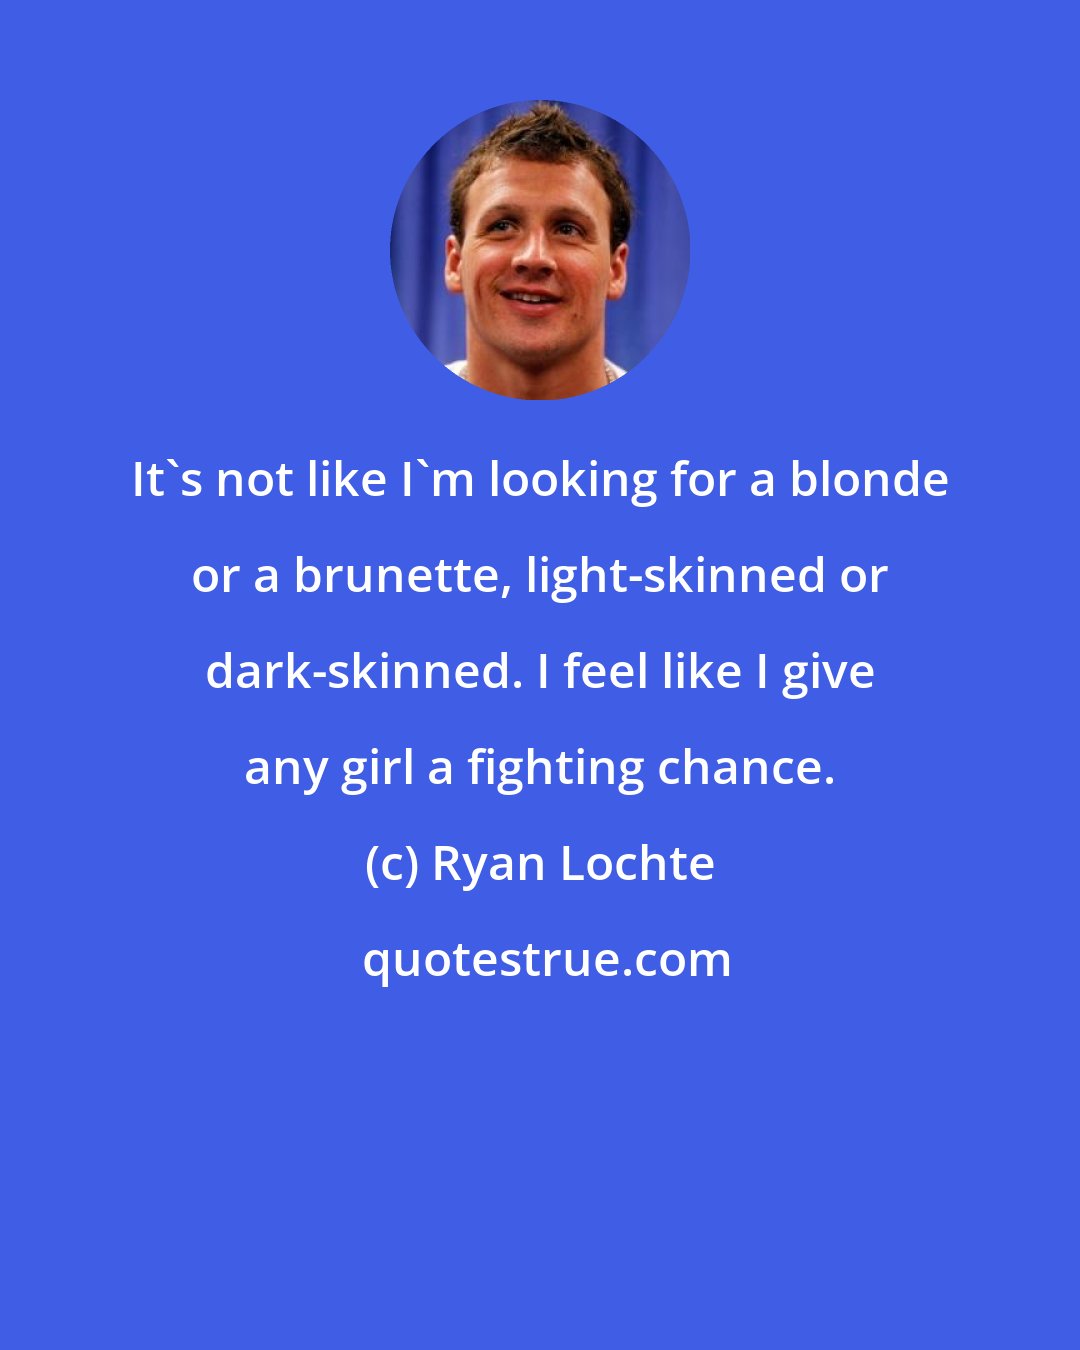 Ryan Lochte: It's not like I'm looking for a blonde or a brunette, light-skinned or dark-skinned. I feel like I give any girl a fighting chance.